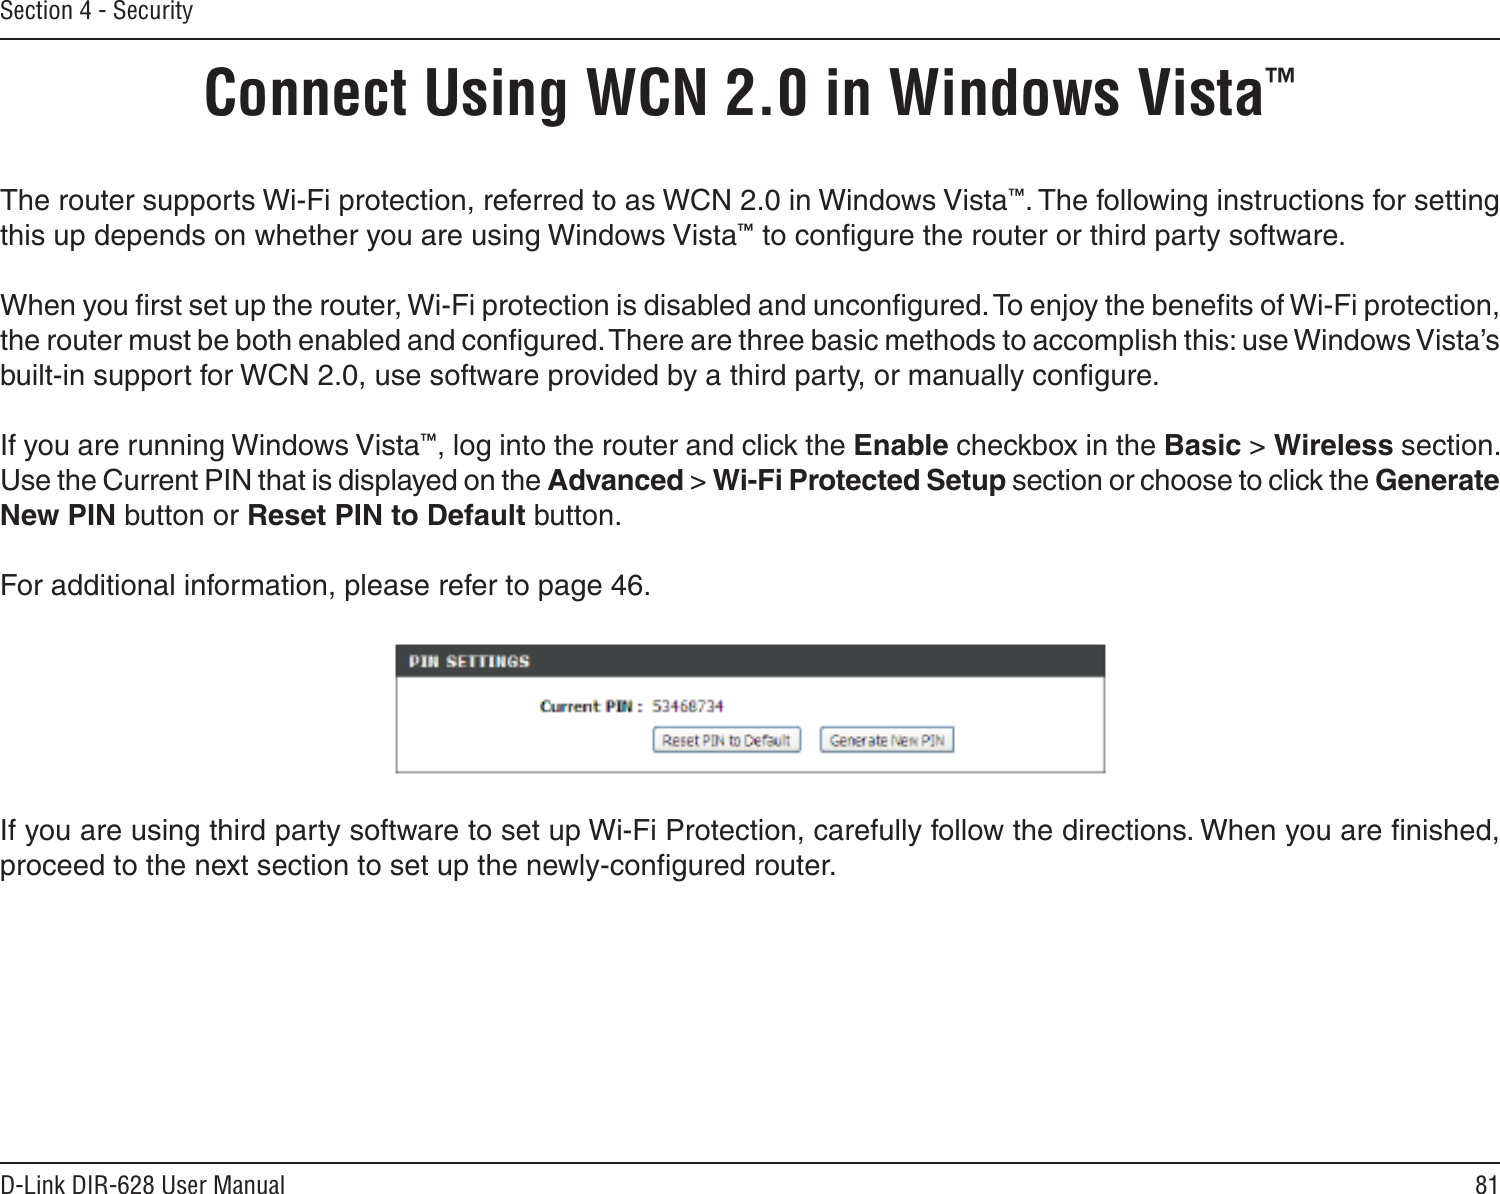 81D-Link DIR-628 User ManualSection 4 - SecurityConnect Using WCN 2.0 in Windows Vista™ The router supports Wi-Fi protection, referred to as WCN 2.0 in Windows Vista™. The following instructions for setting this up depends on whether you are using Windows Vista™ to conﬁgure the router or third party software.        When you ﬁrst set up the router, Wi-Fi protection is disabled and unconﬁgured. To enjoy the beneﬁts of Wi-Fi protection, the router must be both enabled and conﬁgured. There are three basic methods to accomplish this: use Windows Vista’s built-in support for WCN 2.0, use software provided by a third party, or manually conﬁgure. If you are running Windows Vista™, log into the router and click the Enable checkbox in the Basic &gt; Wireless section. Use the Current PIN that is displayed on the Advanced &gt; Wi-Fi Protected Setup section or choose to click the Generate New PIN button or Reset PIN to Default button. For additional information, please refer to page 46.If you are using third party software to set up Wi-Fi Protection, carefully follow the directions. When you are ﬁnished, proceed to the next section to set up the newly-conﬁgured router. 